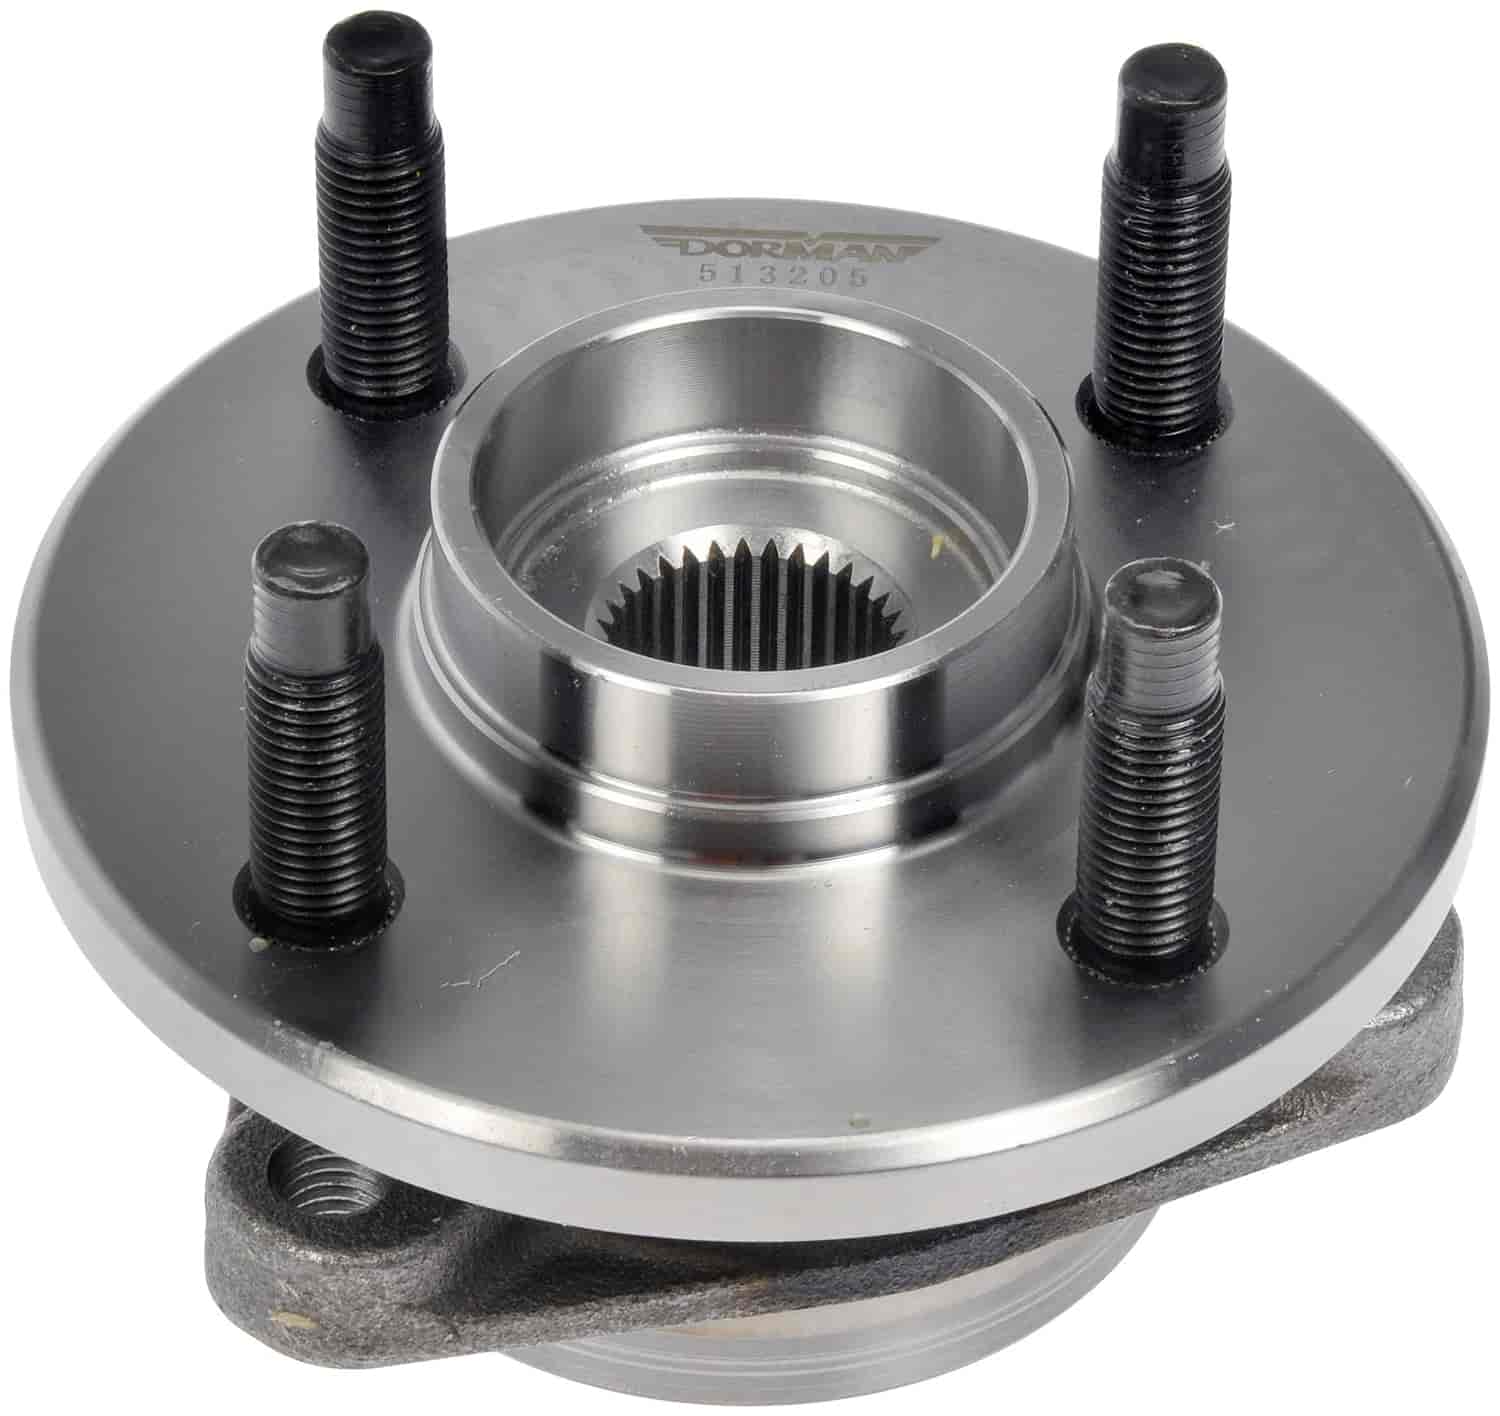 Wheel Hub and Bearing Assembly for 2005-2010 Chevy Cobalt, 2007-2010 Pontiac G5, 2005-2006 Pontiac Pursuit, 2003-2007 Saturn Ion